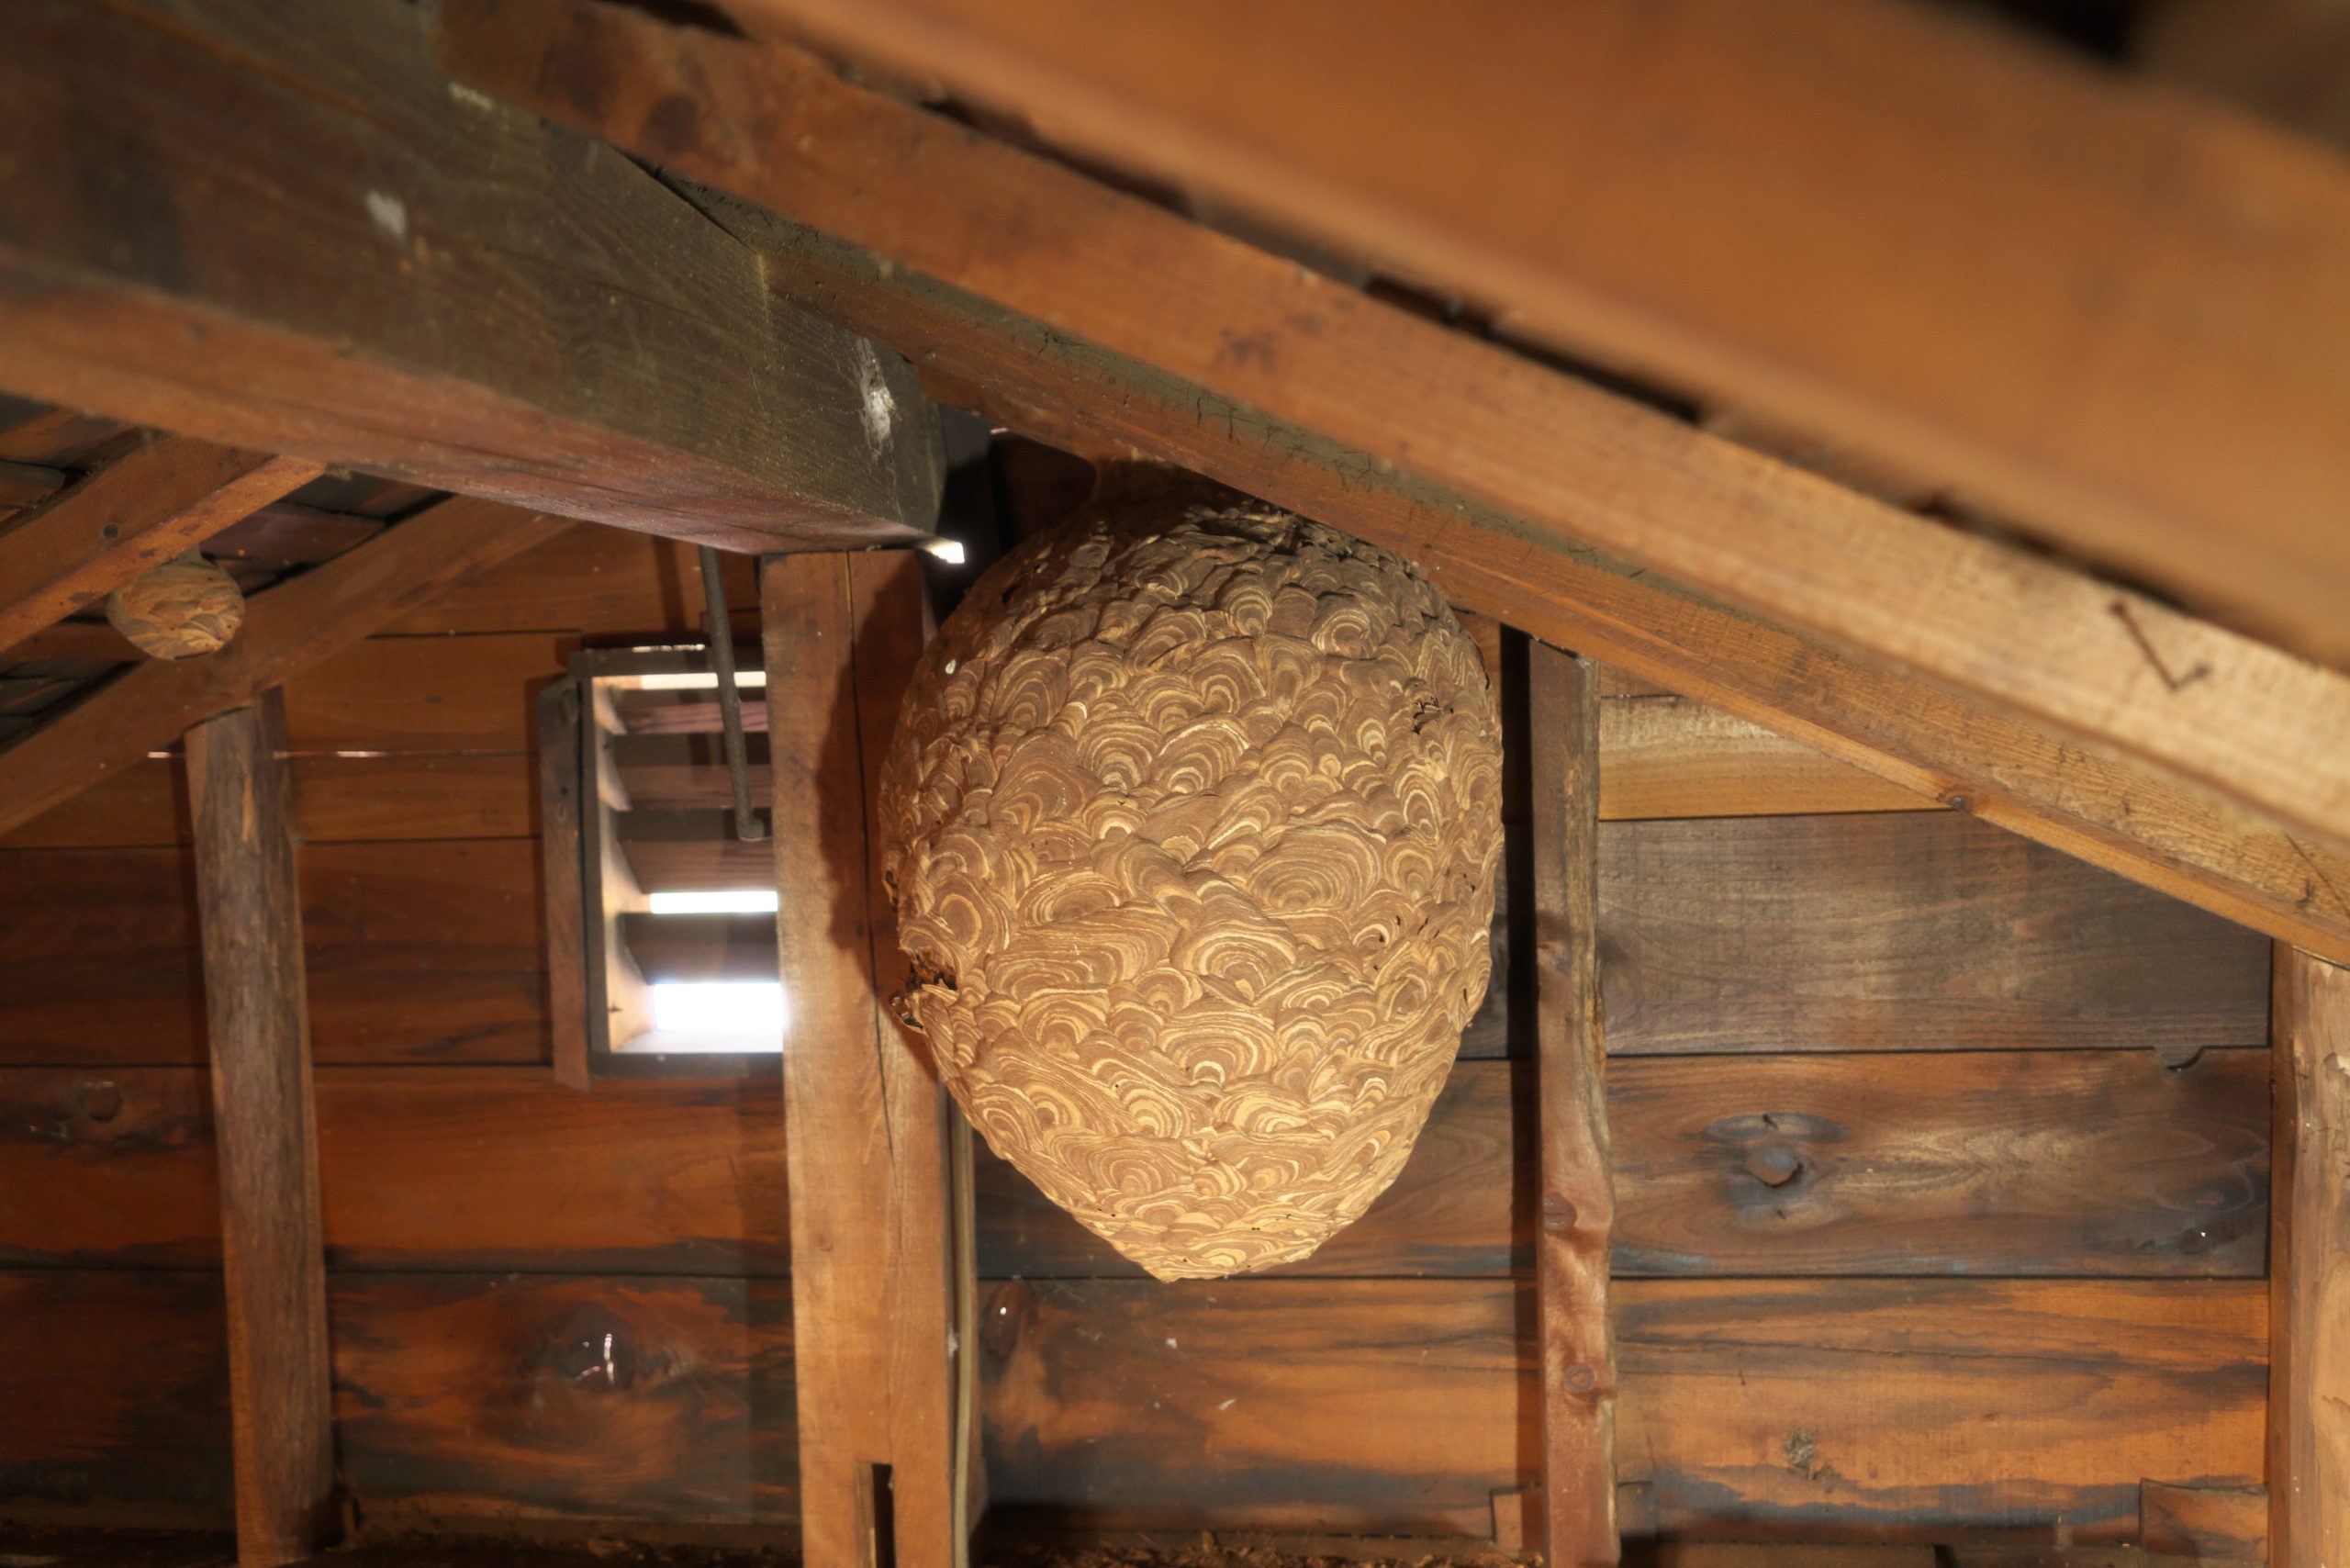 Wirral Wasp Nest Removal, about